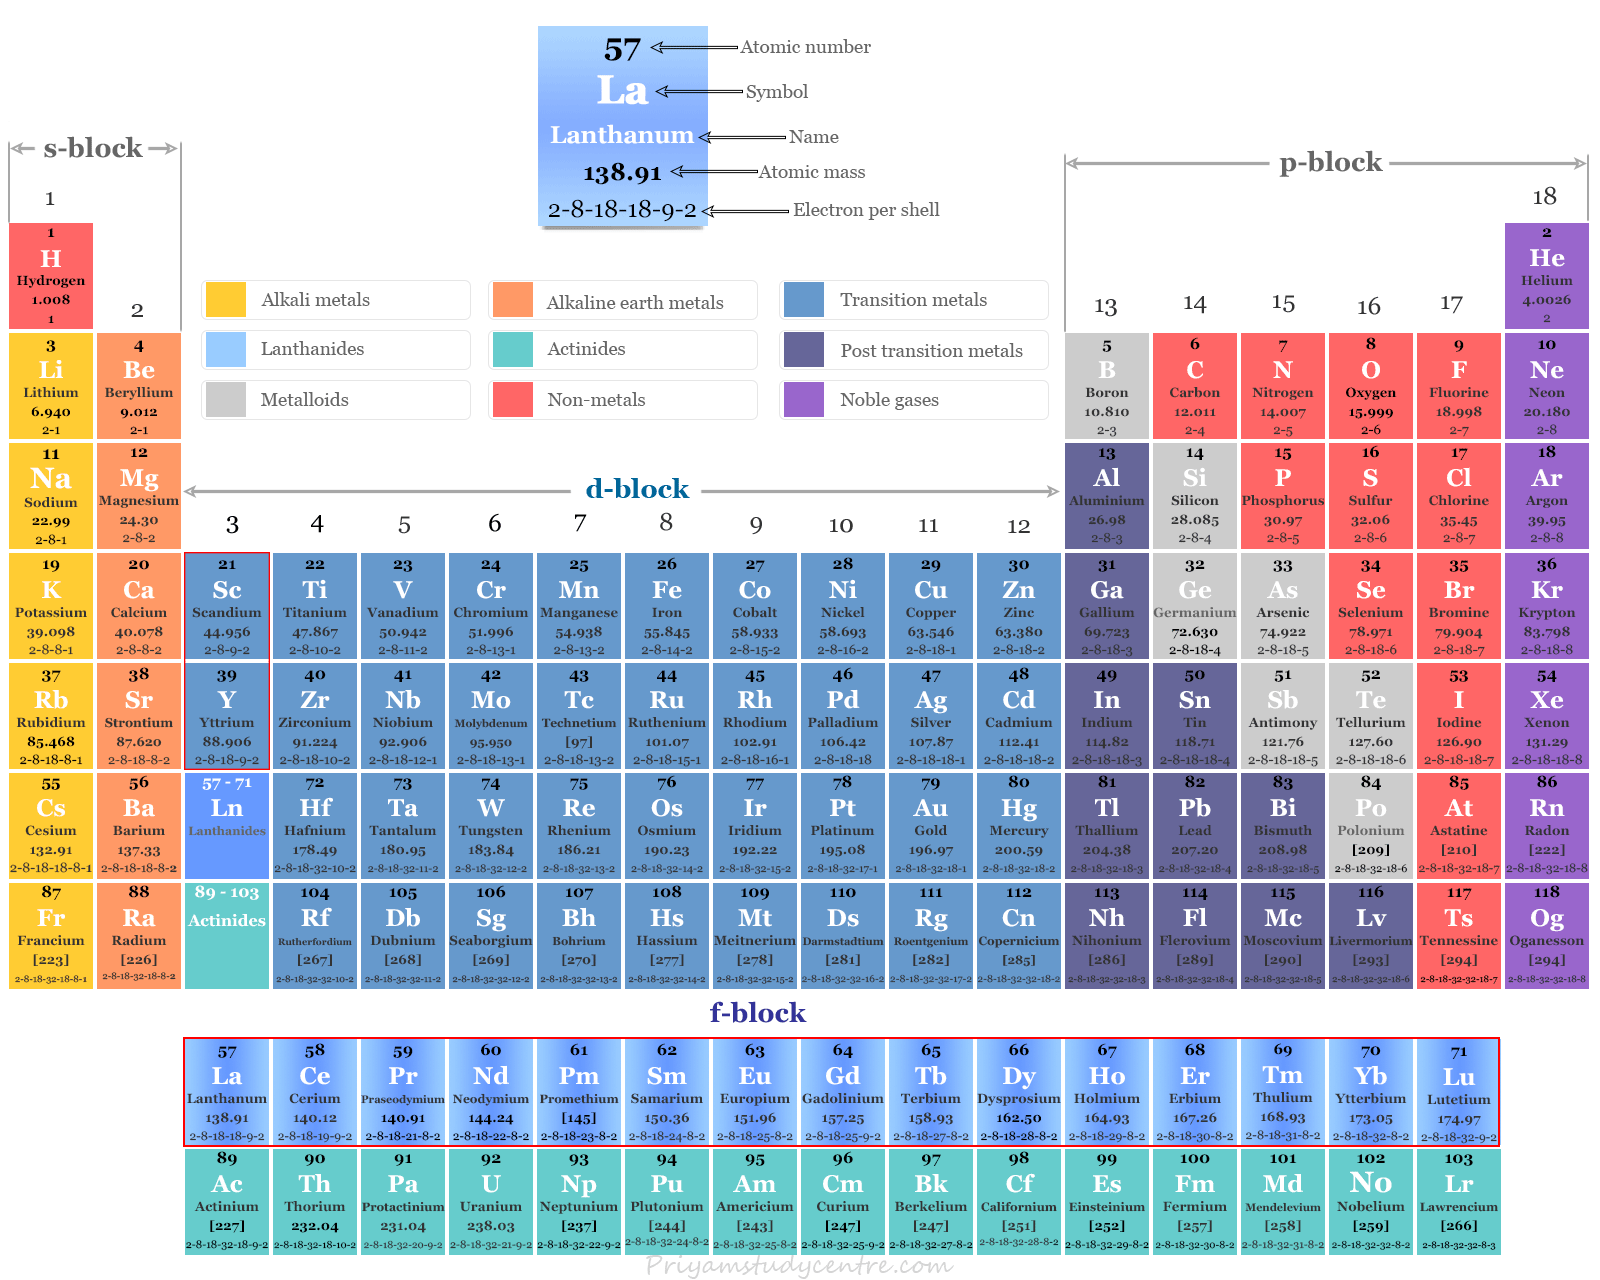 Rare earth elements or metals on the periodic table with name, symbol, atomic number and properties of lanthanides or inner transition metal